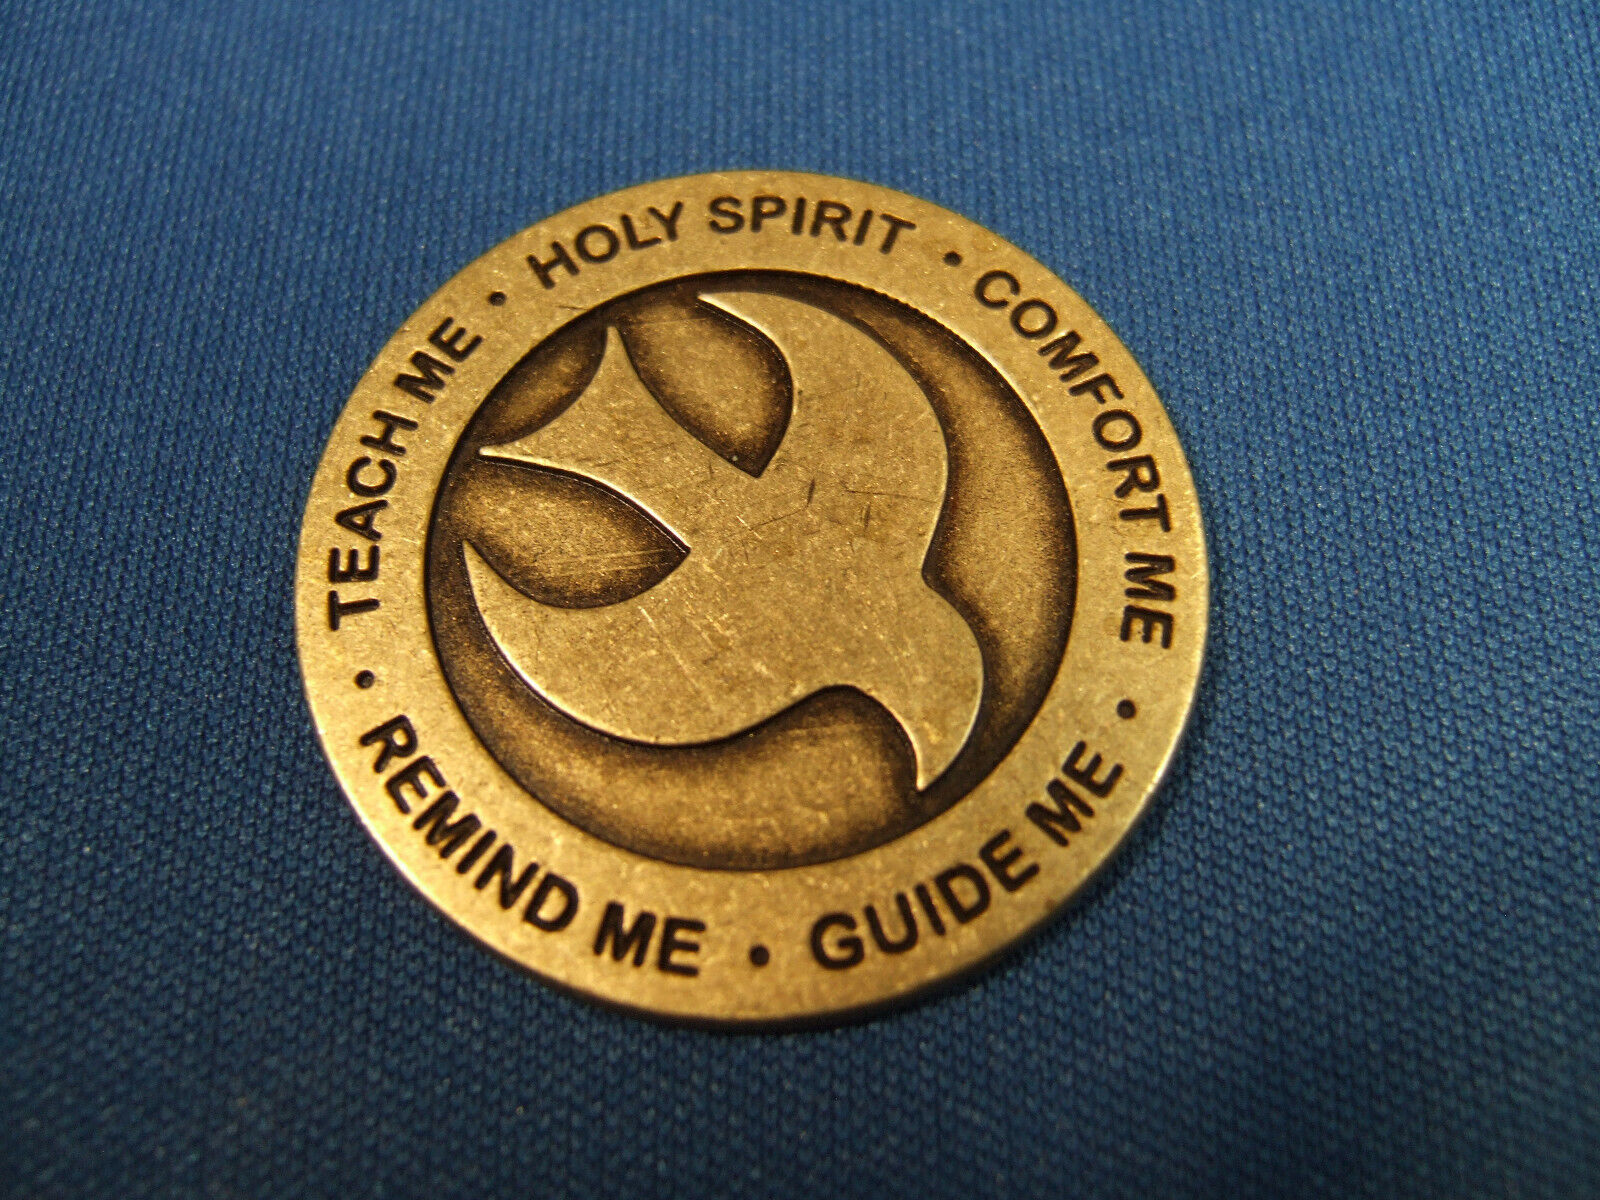 Holy Spirit Coin $5.60, lot of 1